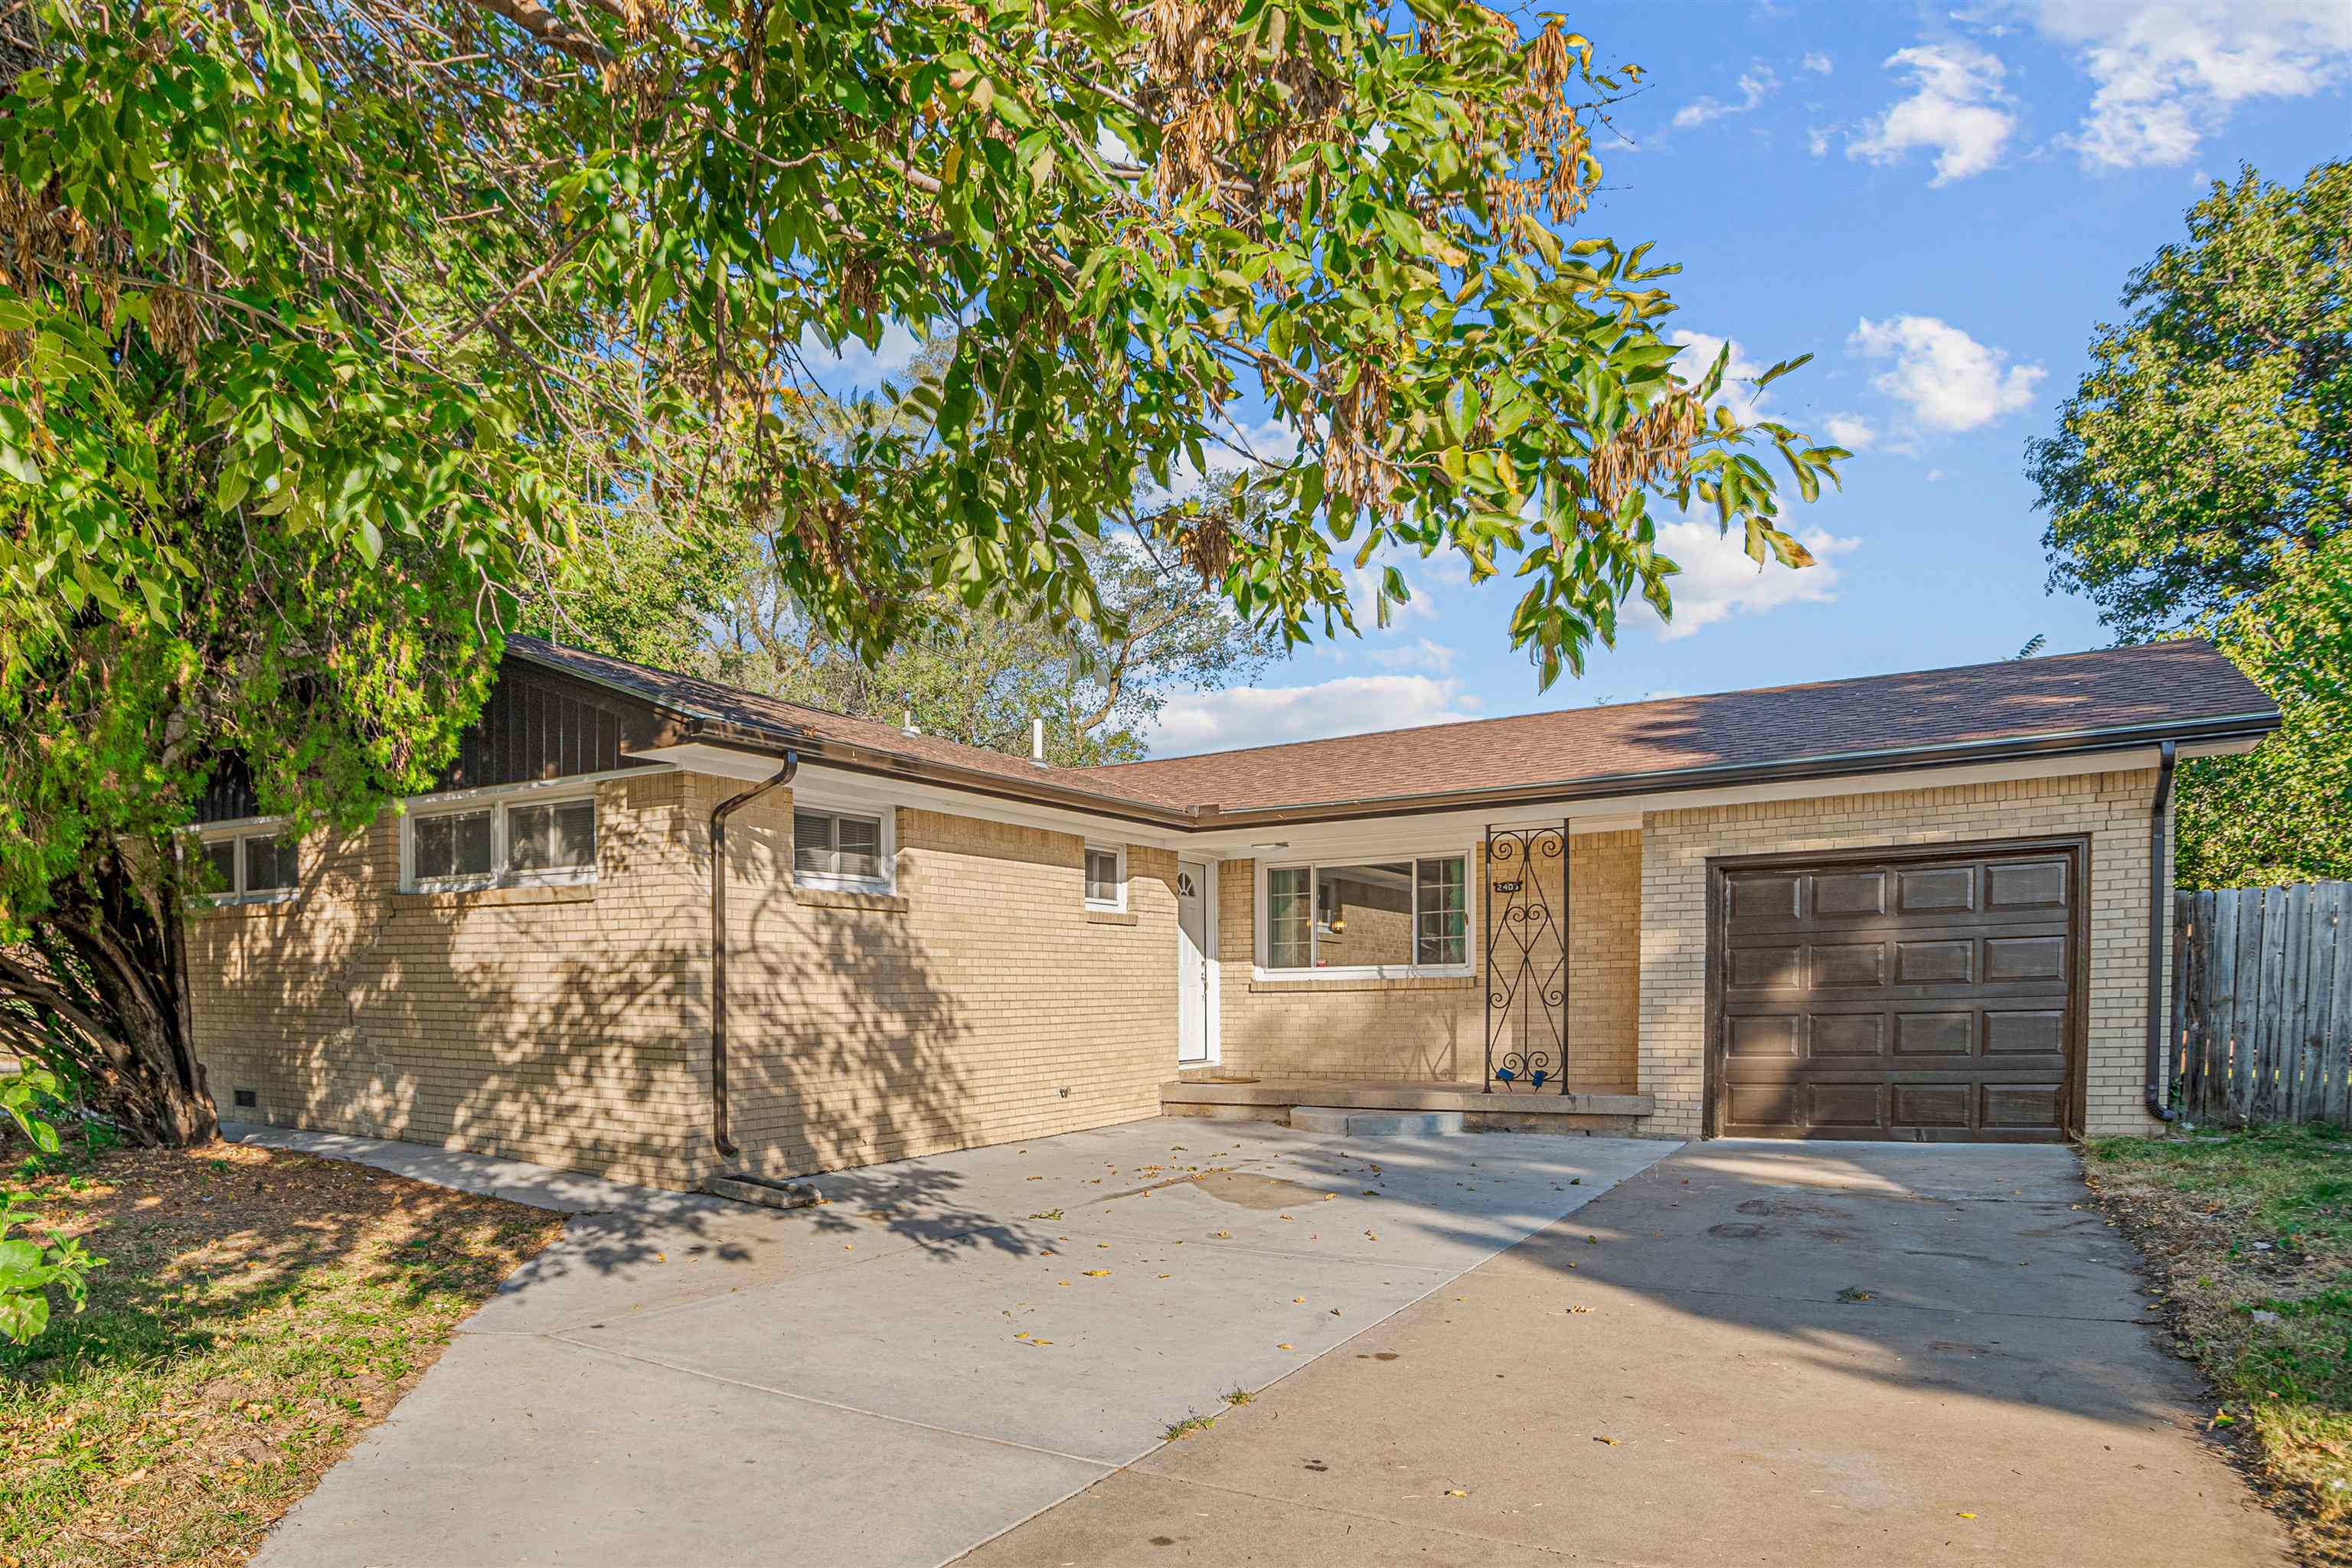 Photo of 2403 N Clarence Ave in Wichita, KS